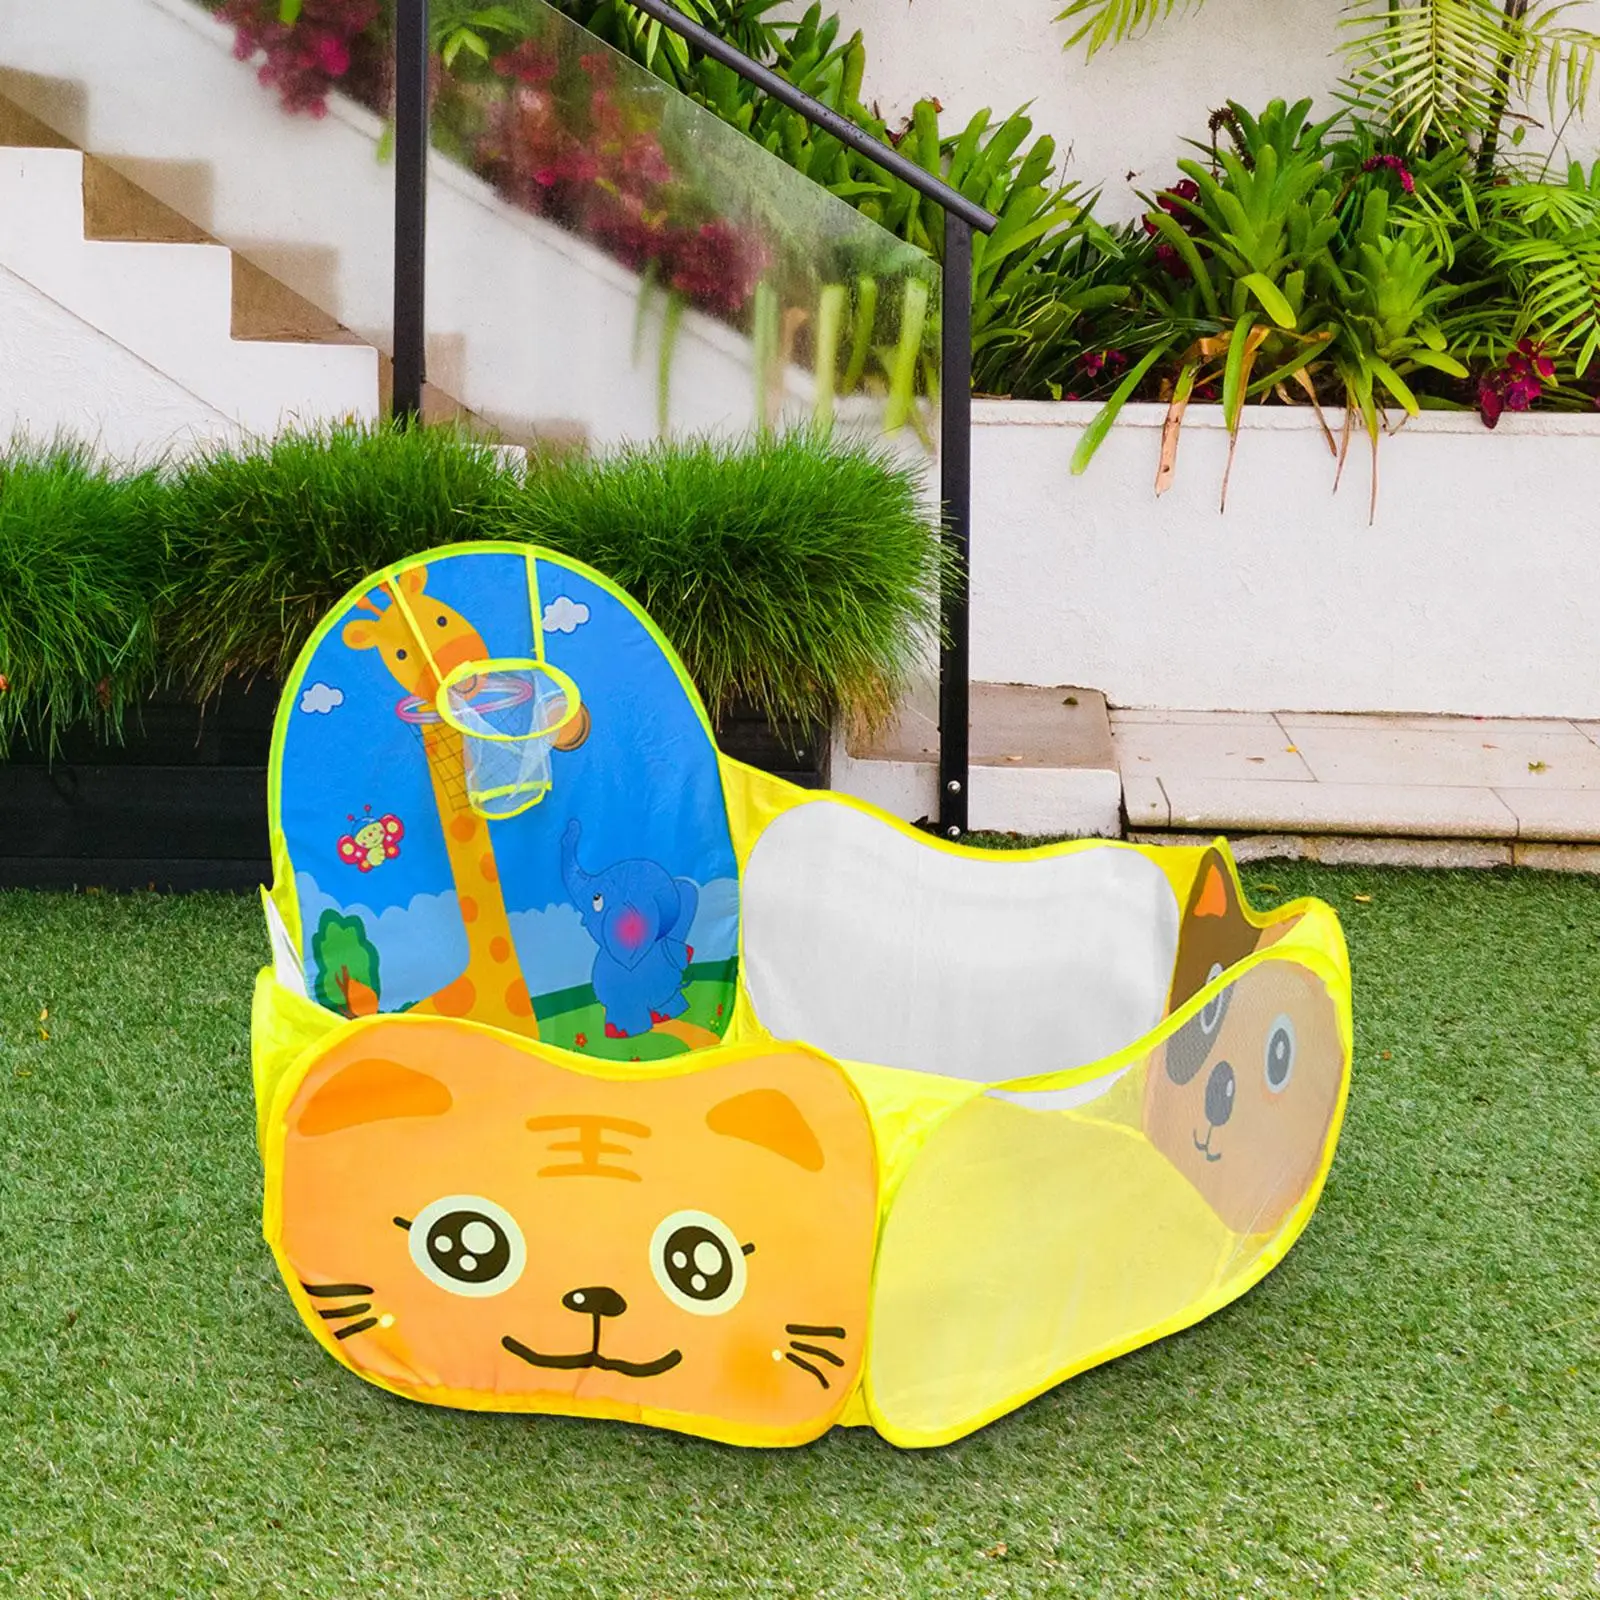 Kids Play Tent Gift Child Room Decoration Baby Crawl Playpen Toys Foldable Tent for Boy Girls Children Kids Outdoor Indoor Play